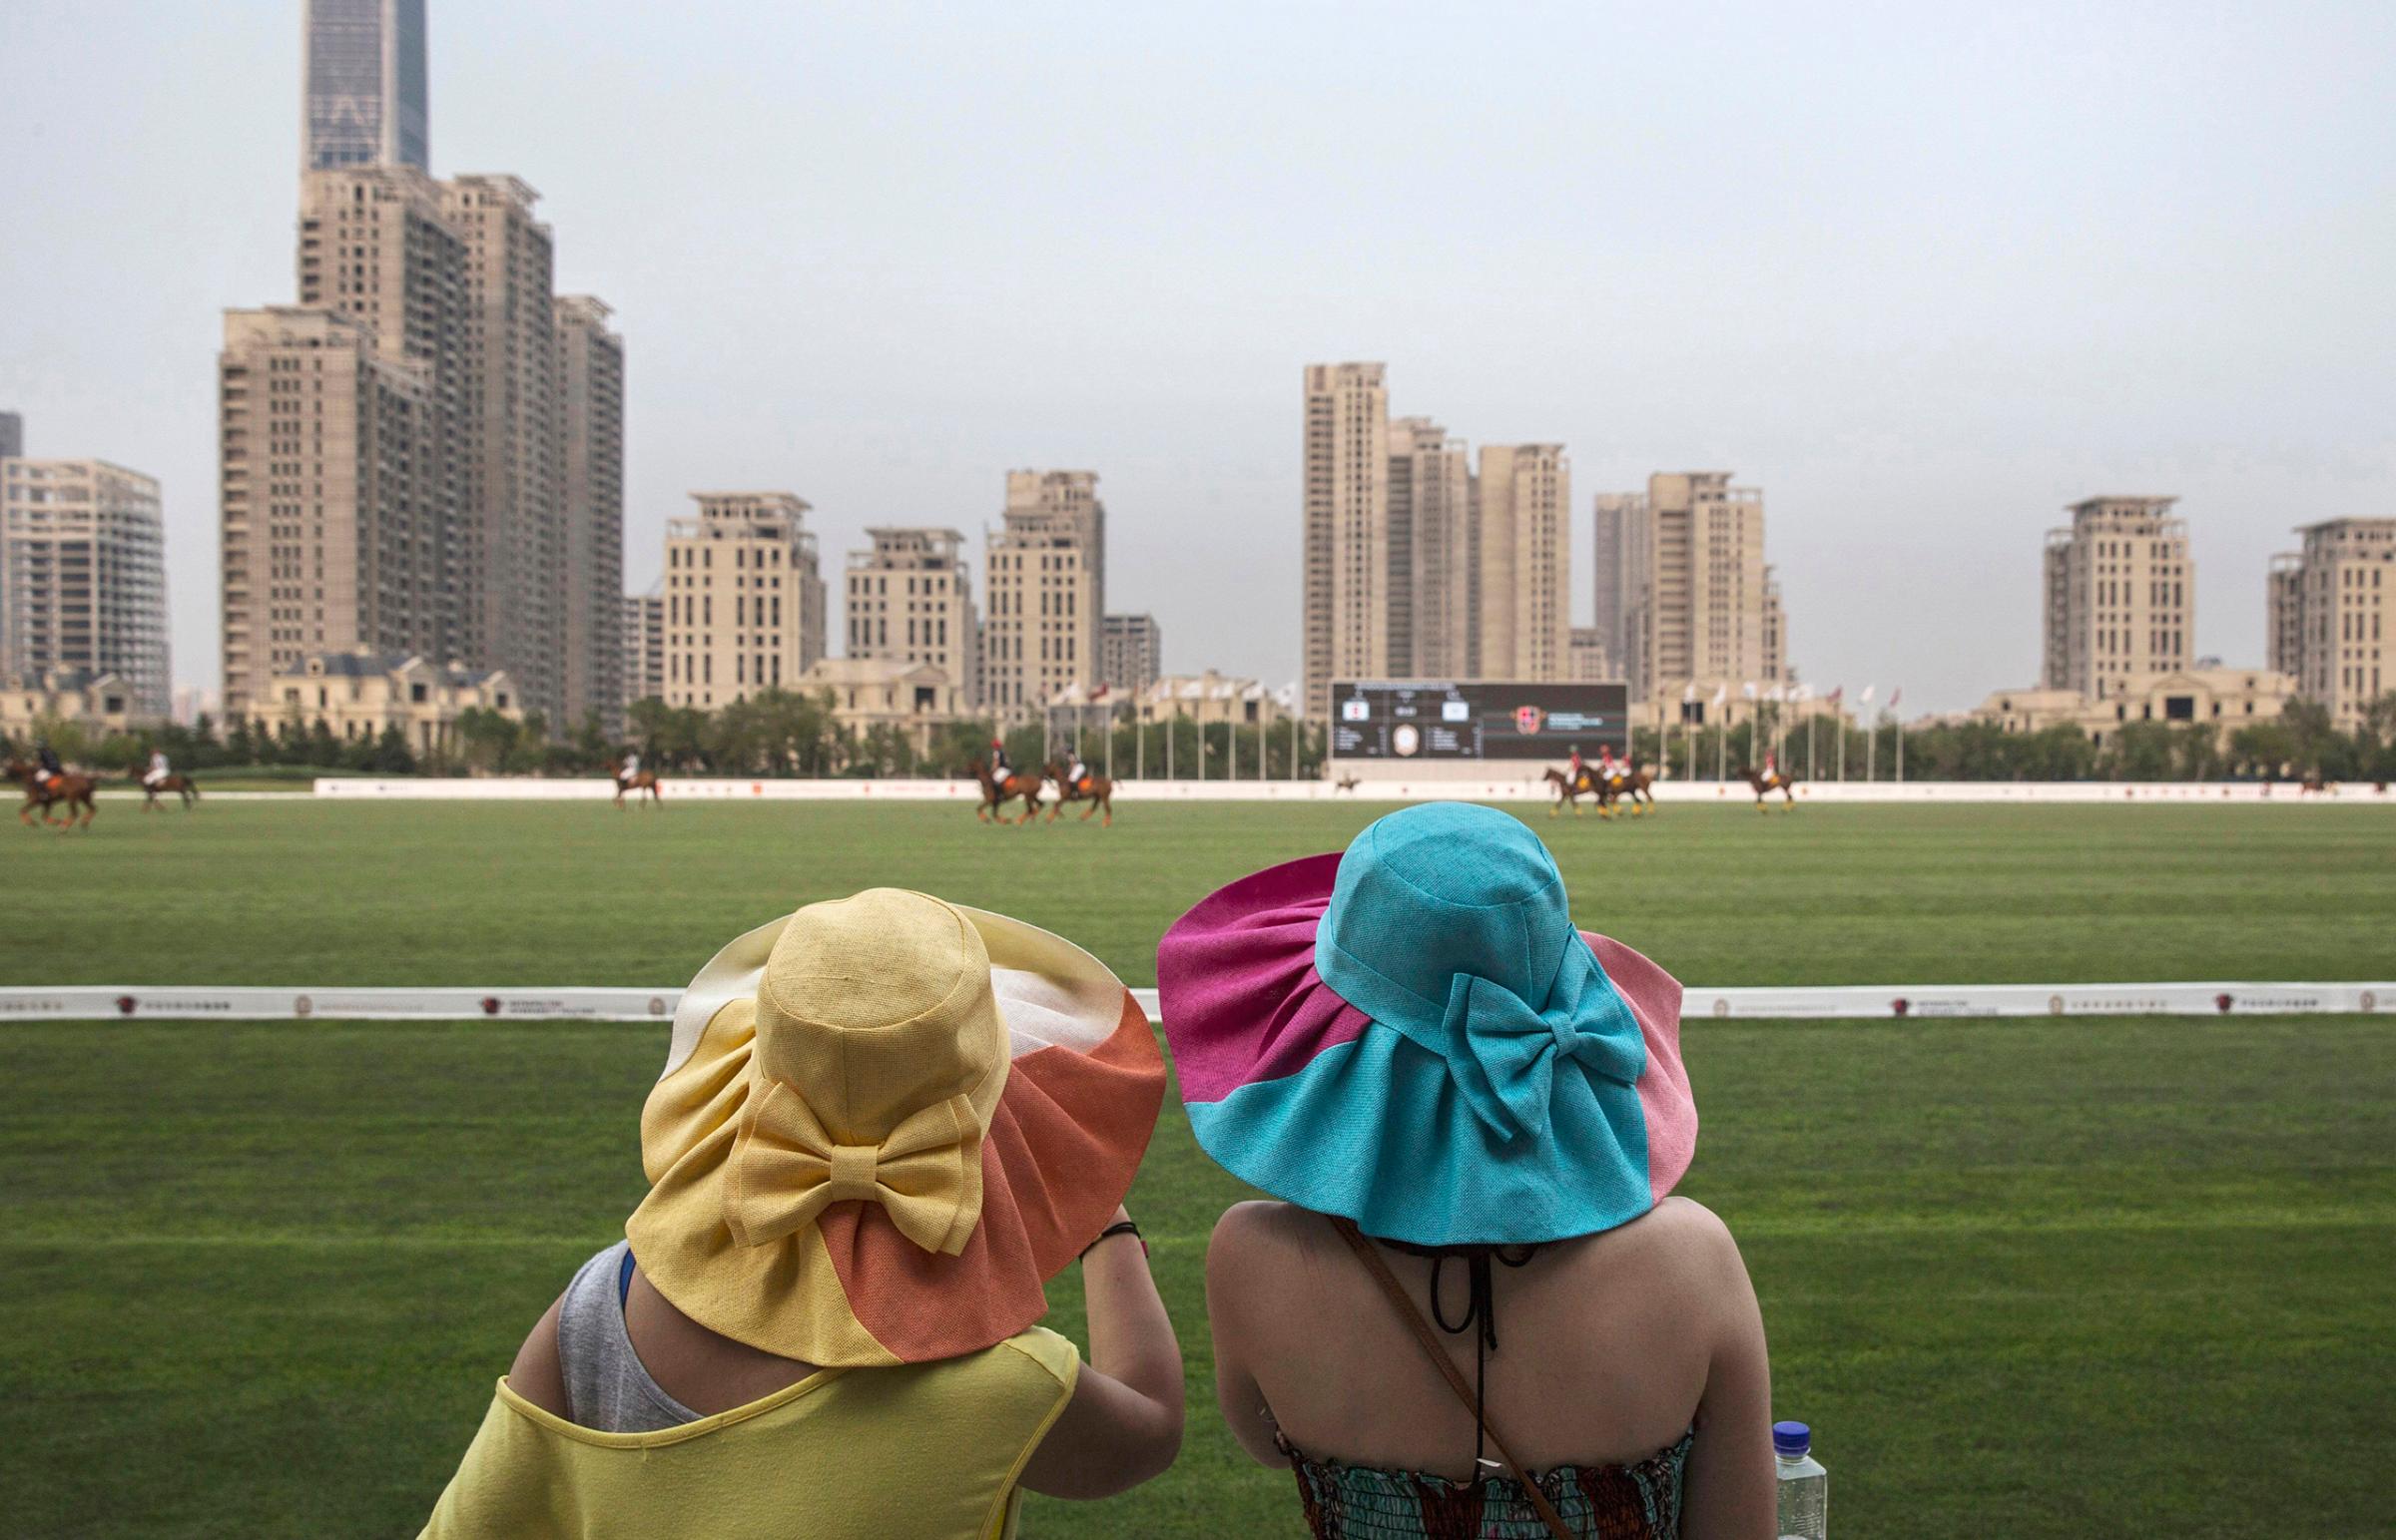 Spectators watch a match between Chinese players from the Metropolitan Polo Club team and those visiting from the U.S. and Britain during the intervarsity tournament at the Tianjin Goldin Metropolitan Polo Club in Tianjin, China, on July 17, 2016.